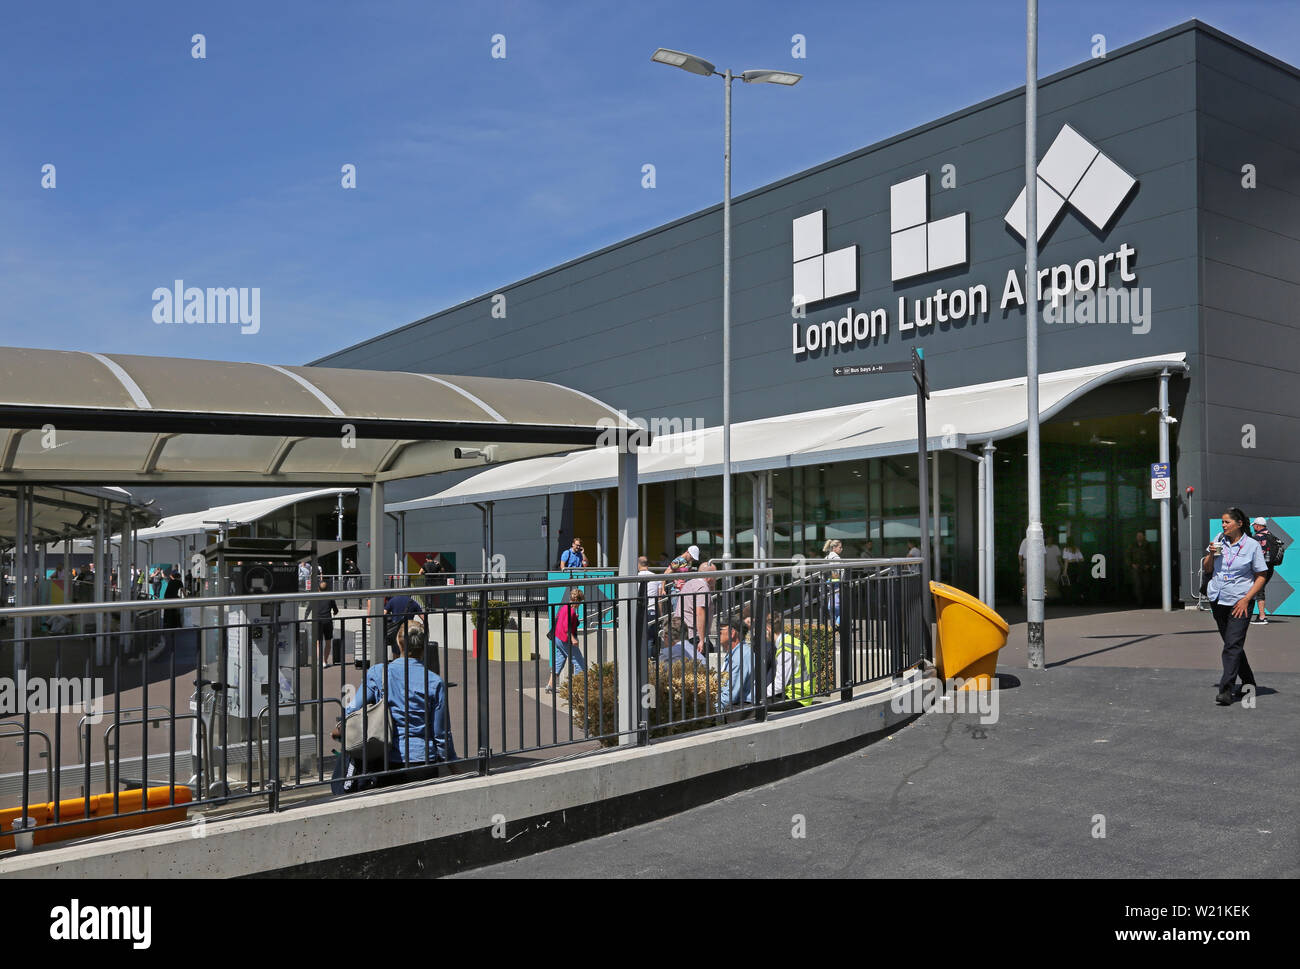 Luton Airport, London. Passenger drop-off area and entrance to the main terminal building - featuring new airport Logo (summer 2019) Stock Photo